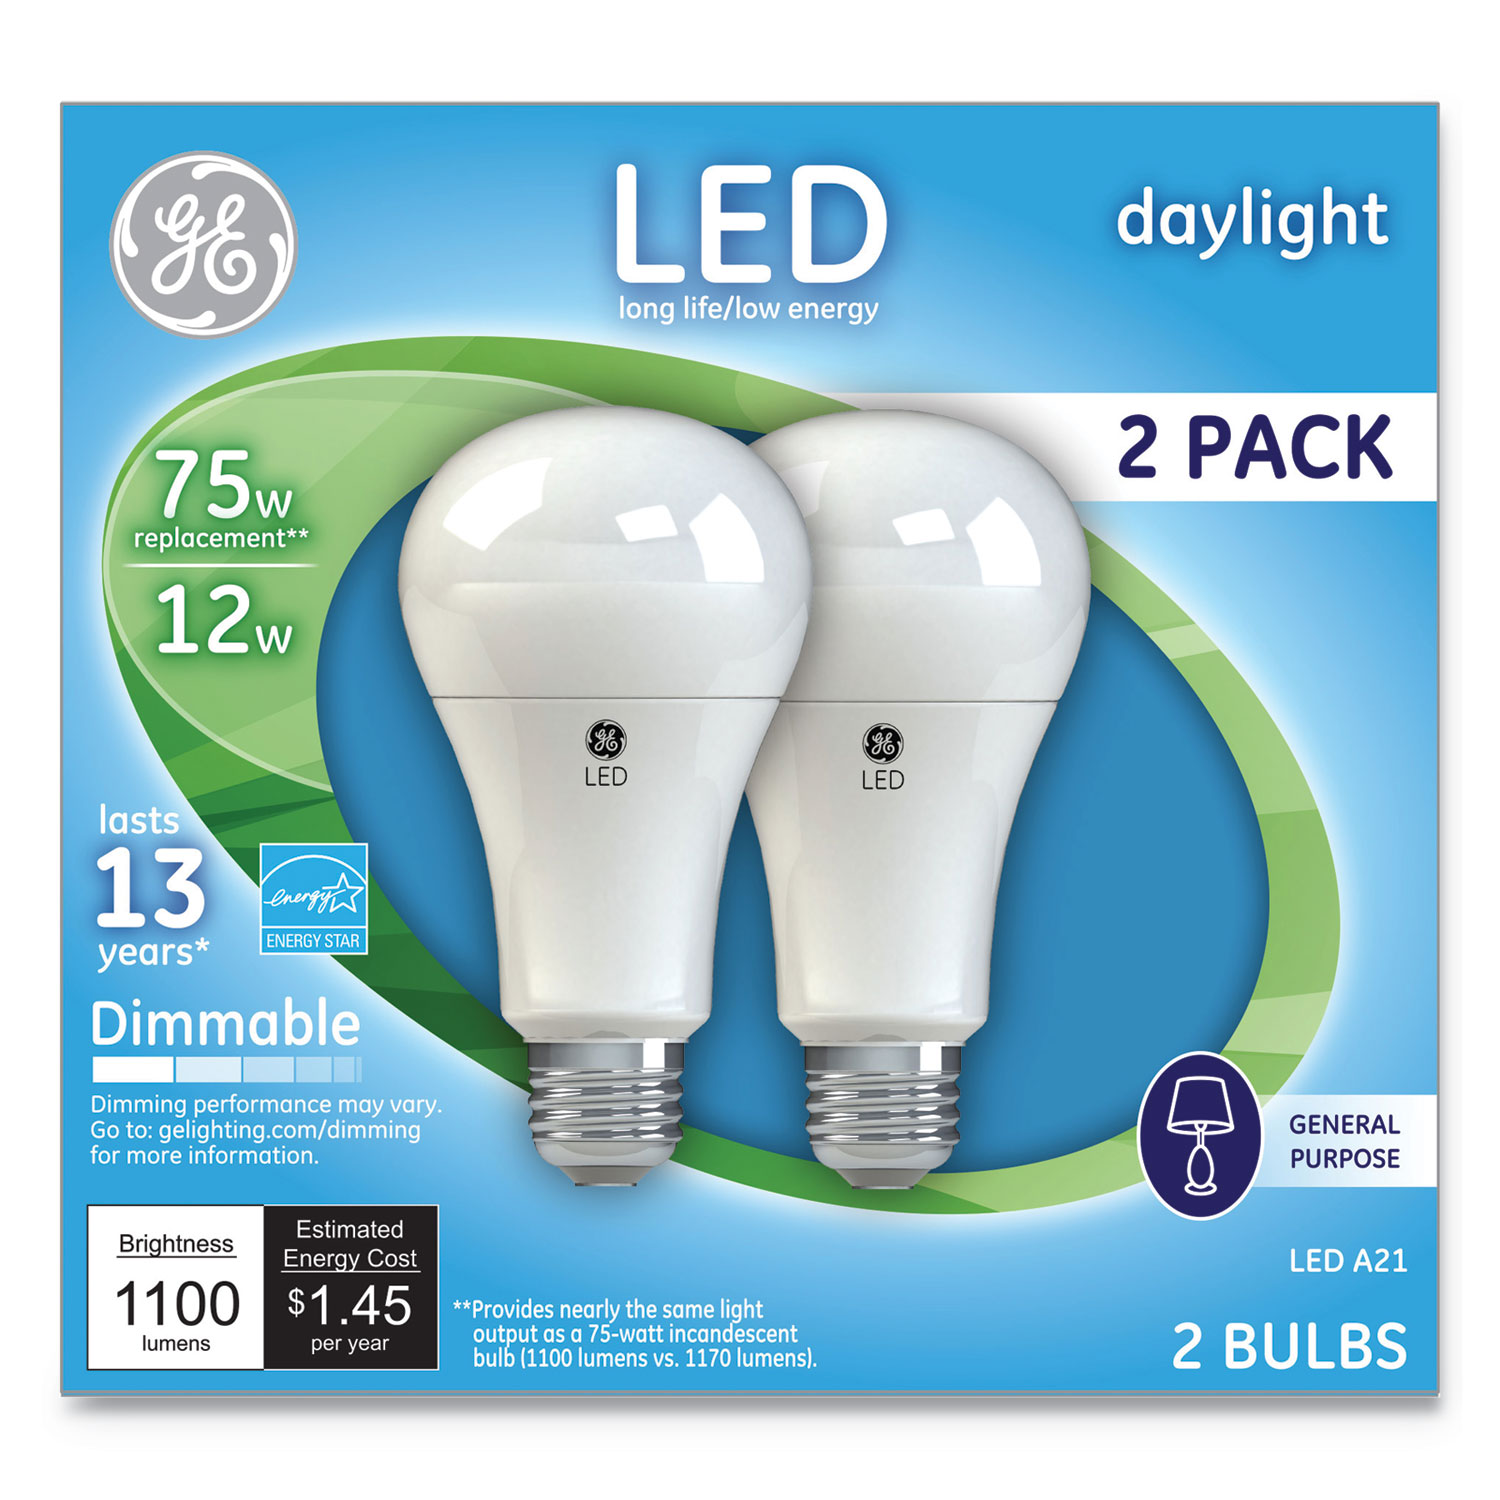  GE 66117 LED Daylight A21 Dimmable Light Bulb, 12 W, 2/Pack (GEL66117) 